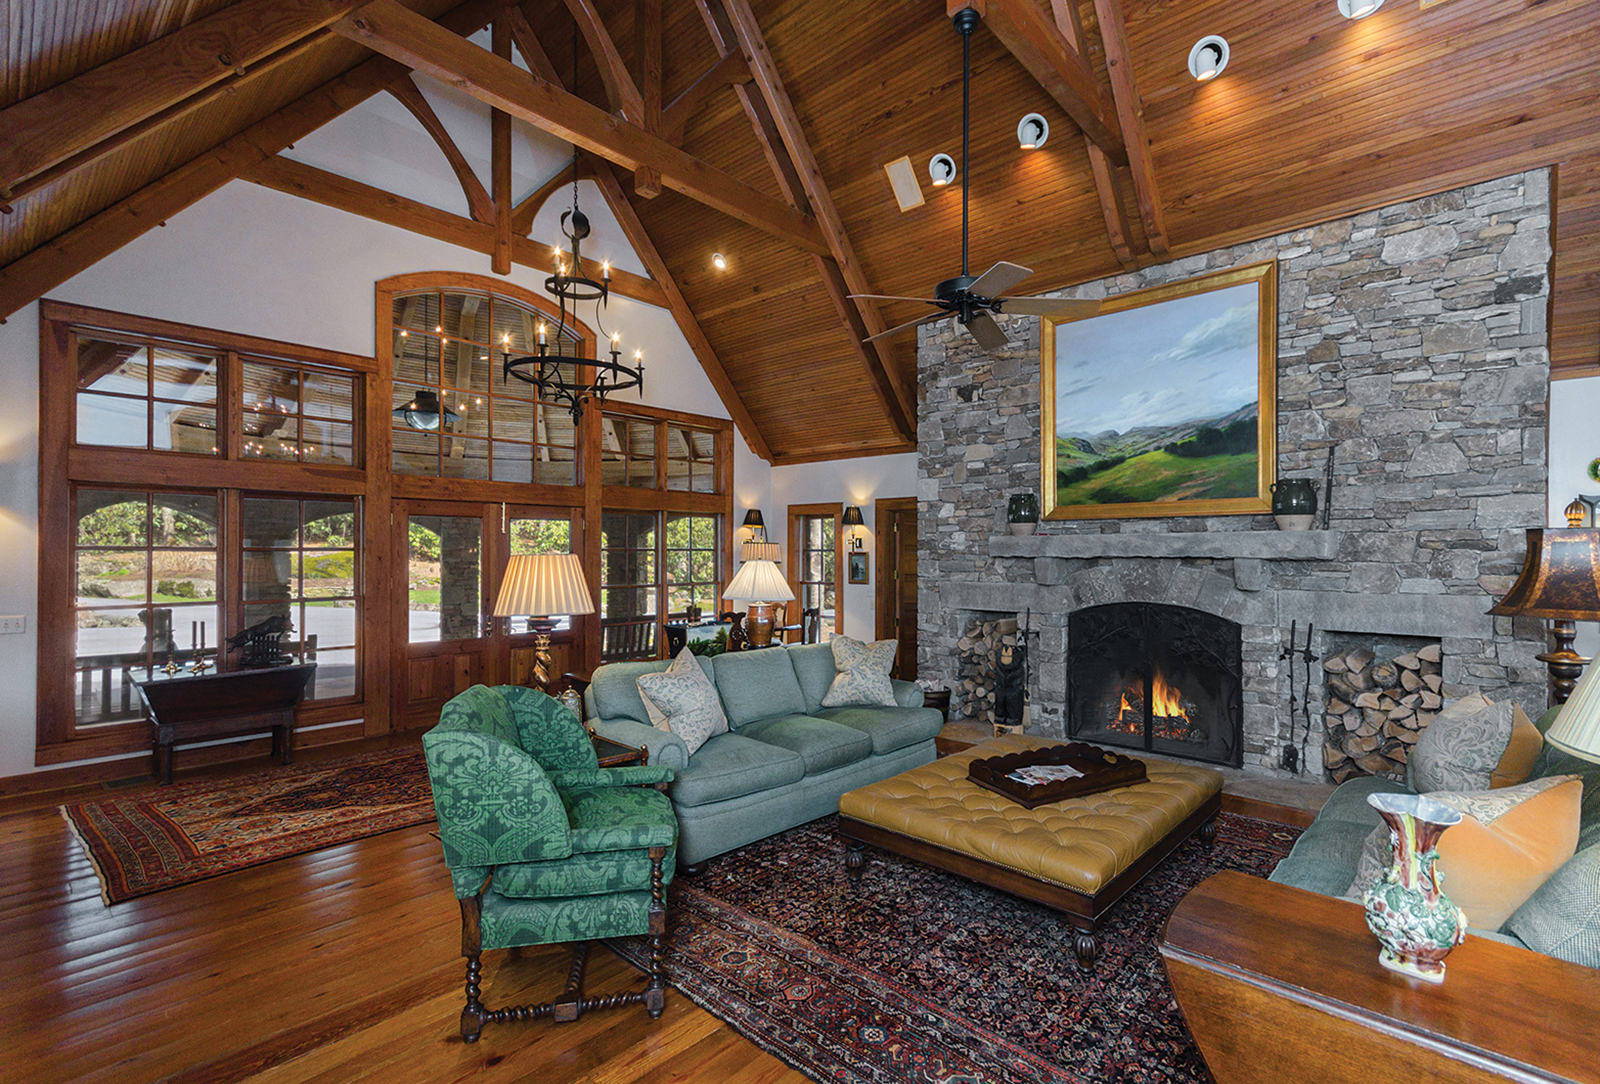 Home for sale in Cashiers NC - sitting area